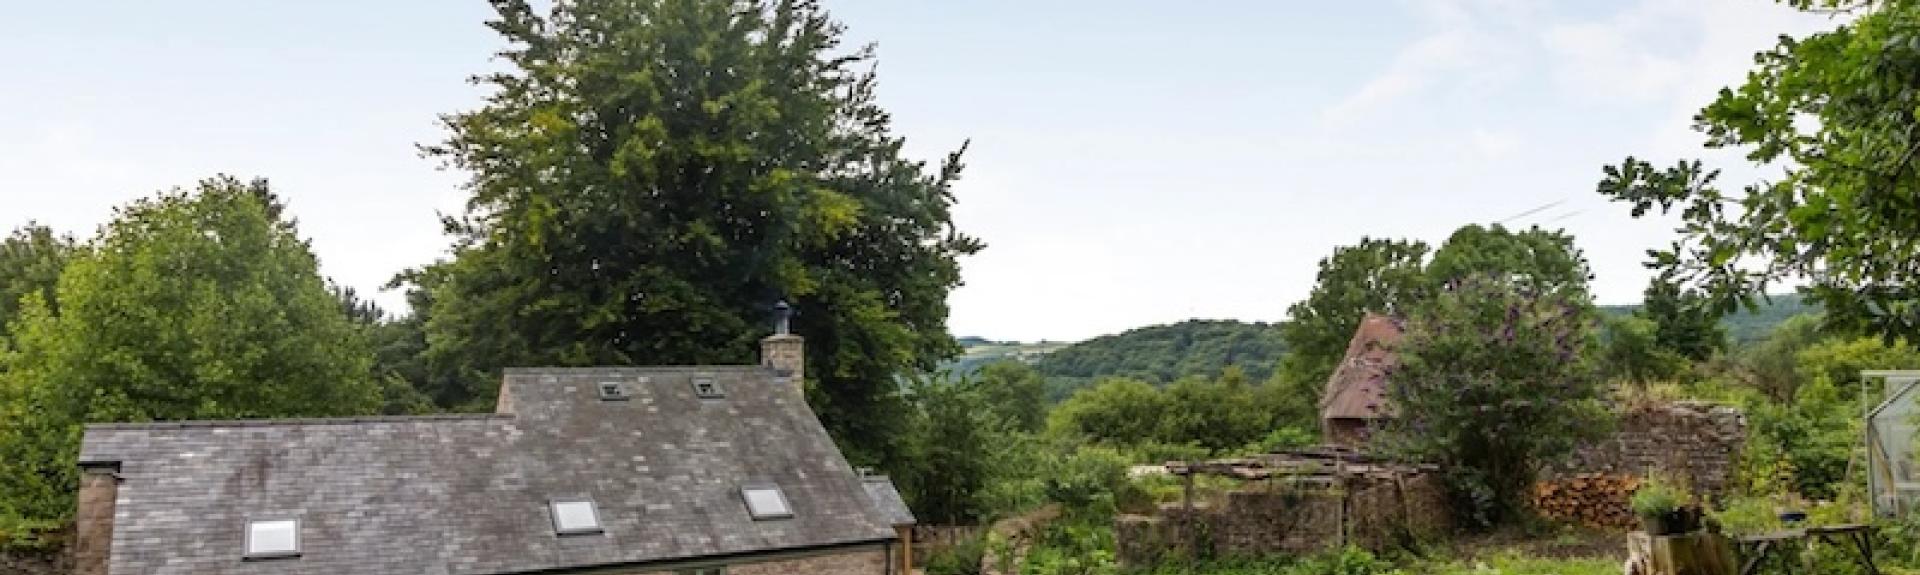 A glimpse of the rooftop and 1st floor of a country cottage surrounded by woods and fields.